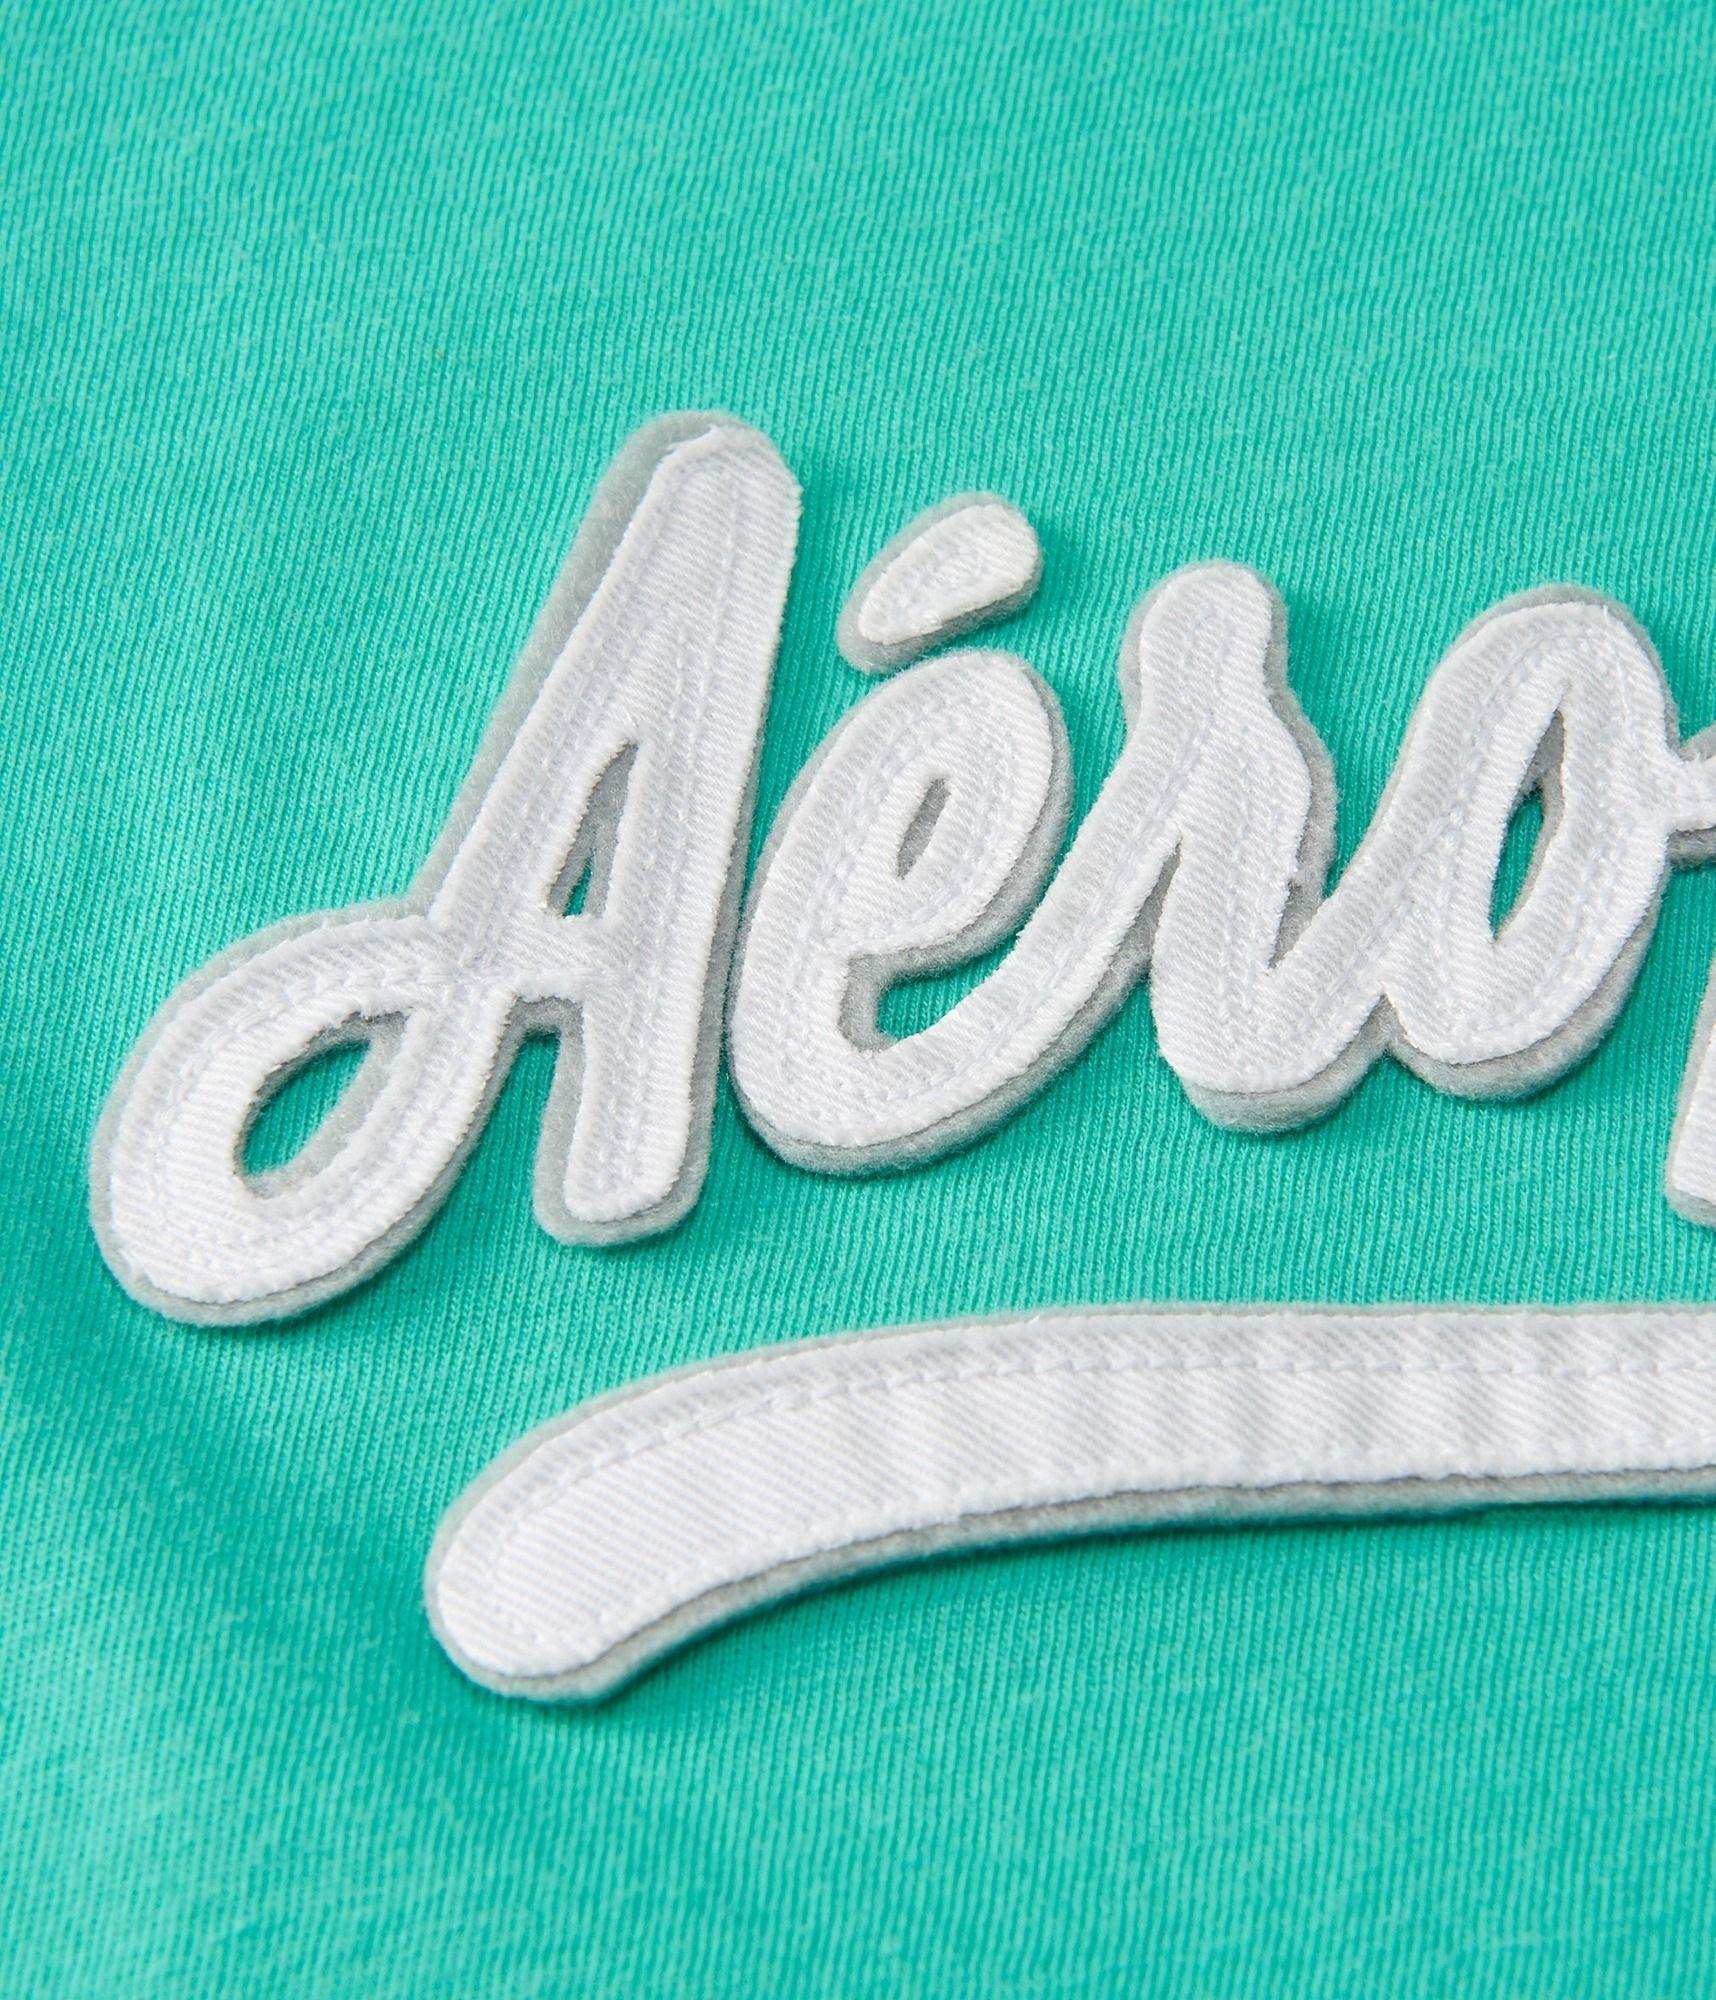 Areopostile Logo - Aéropostale Logo Graphic Tee